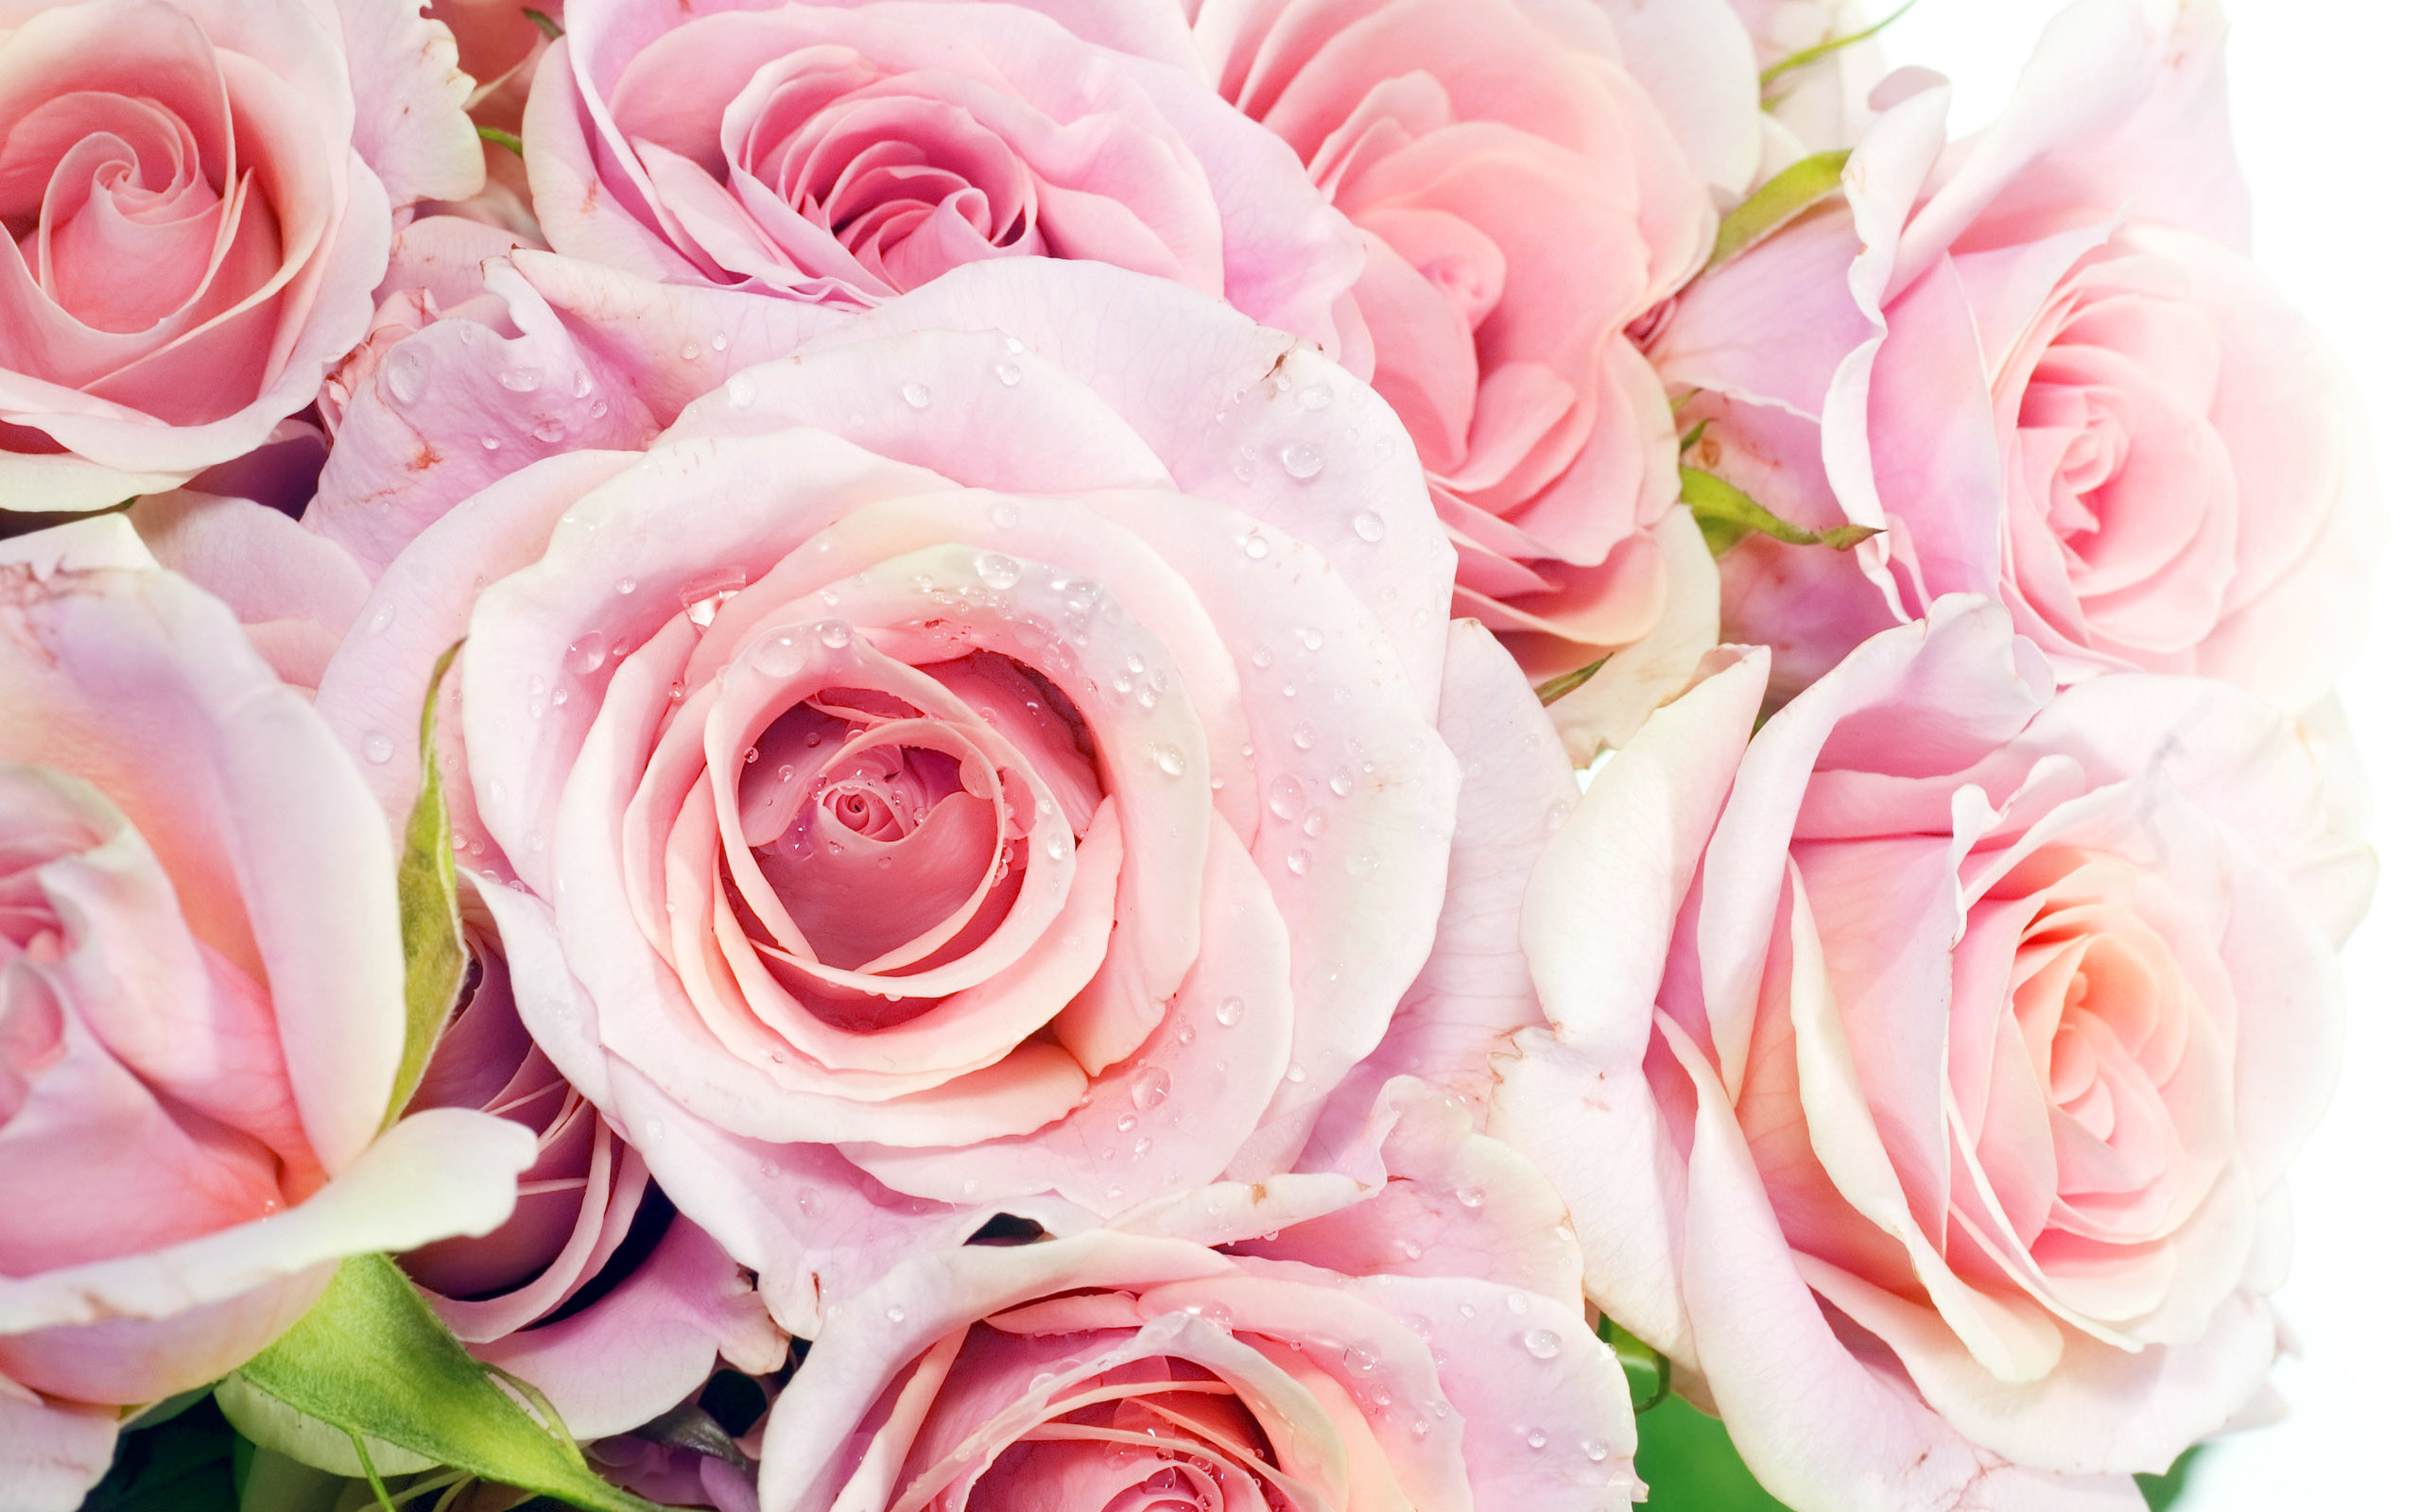 HD Wallpaper and background photos of Pretty Pink Roses Wallpaper for fans of Pink Color images